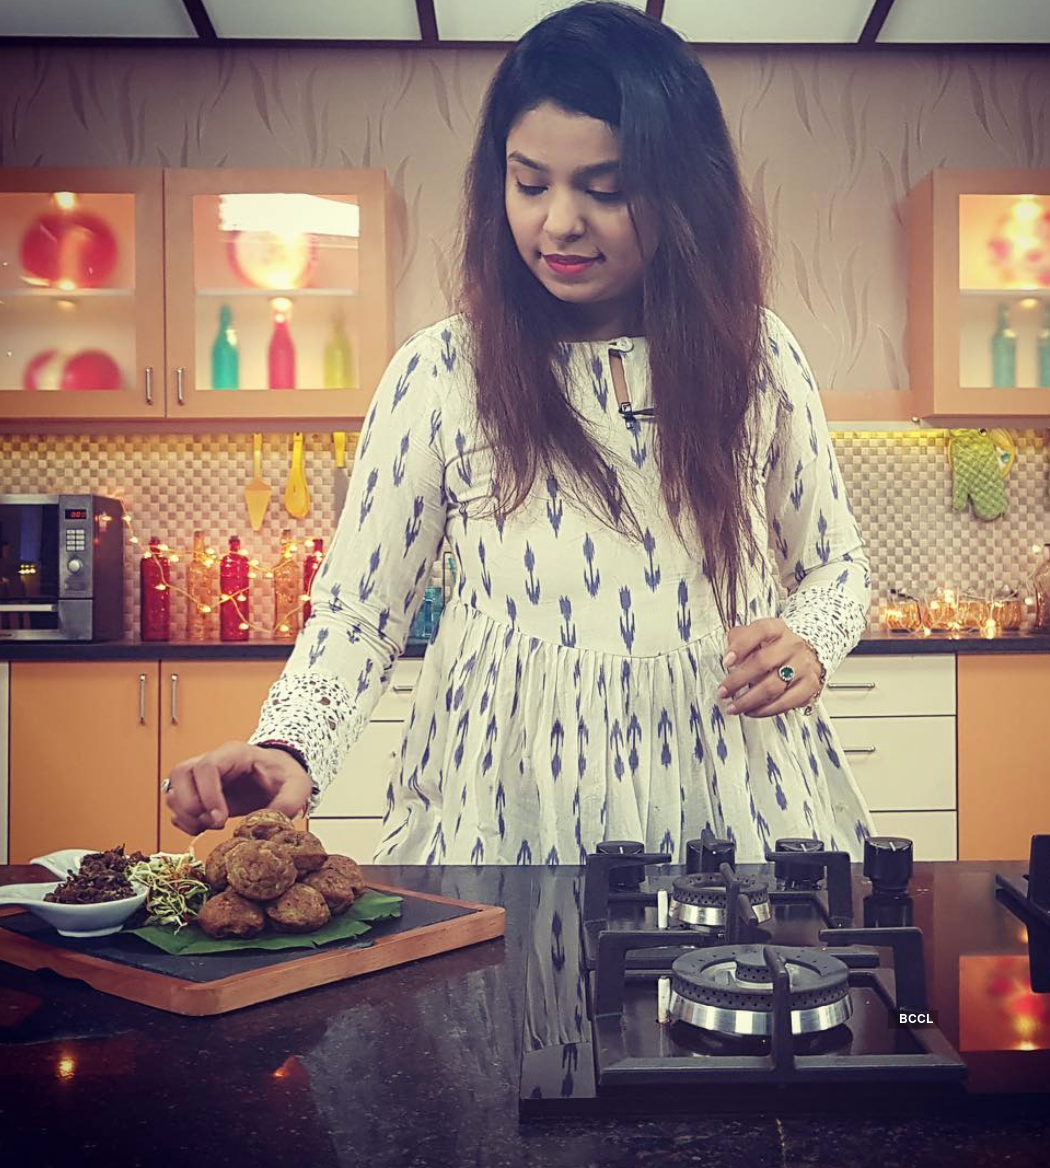 Know more about Aanal Kotak's inspiring journey from a simple girl to celebrity chef